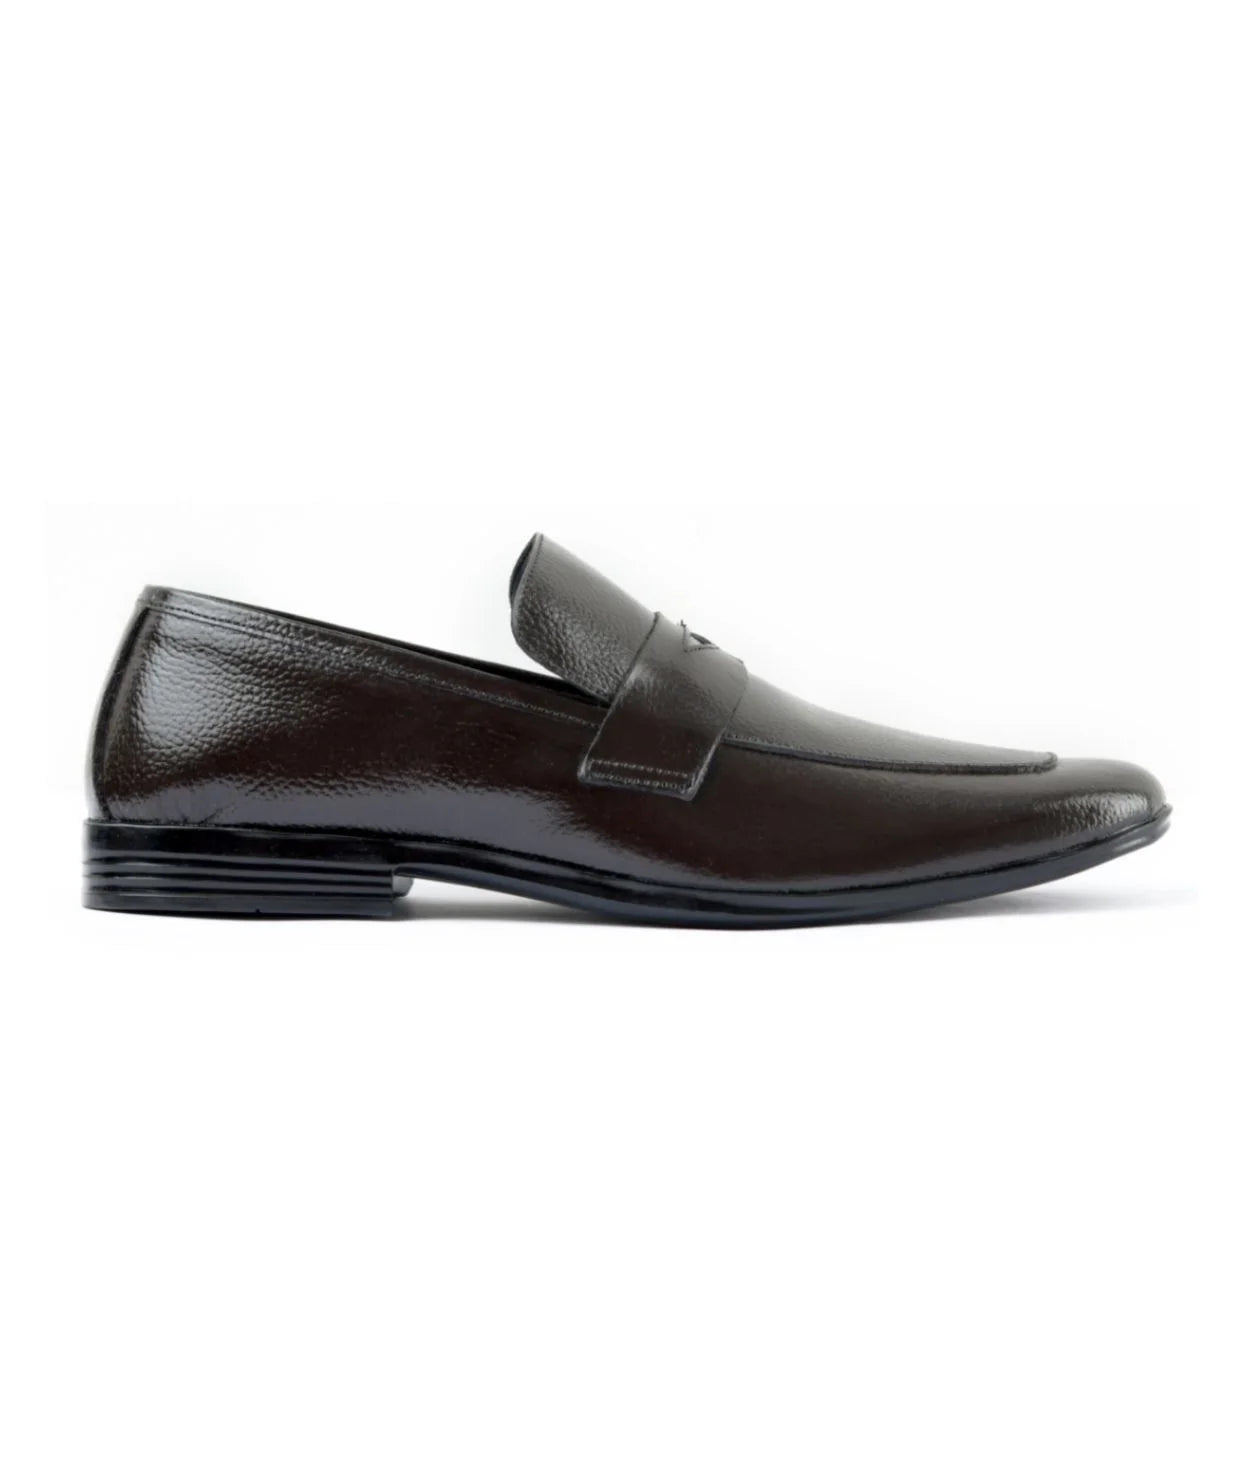 Deep Brown Penny Loafer